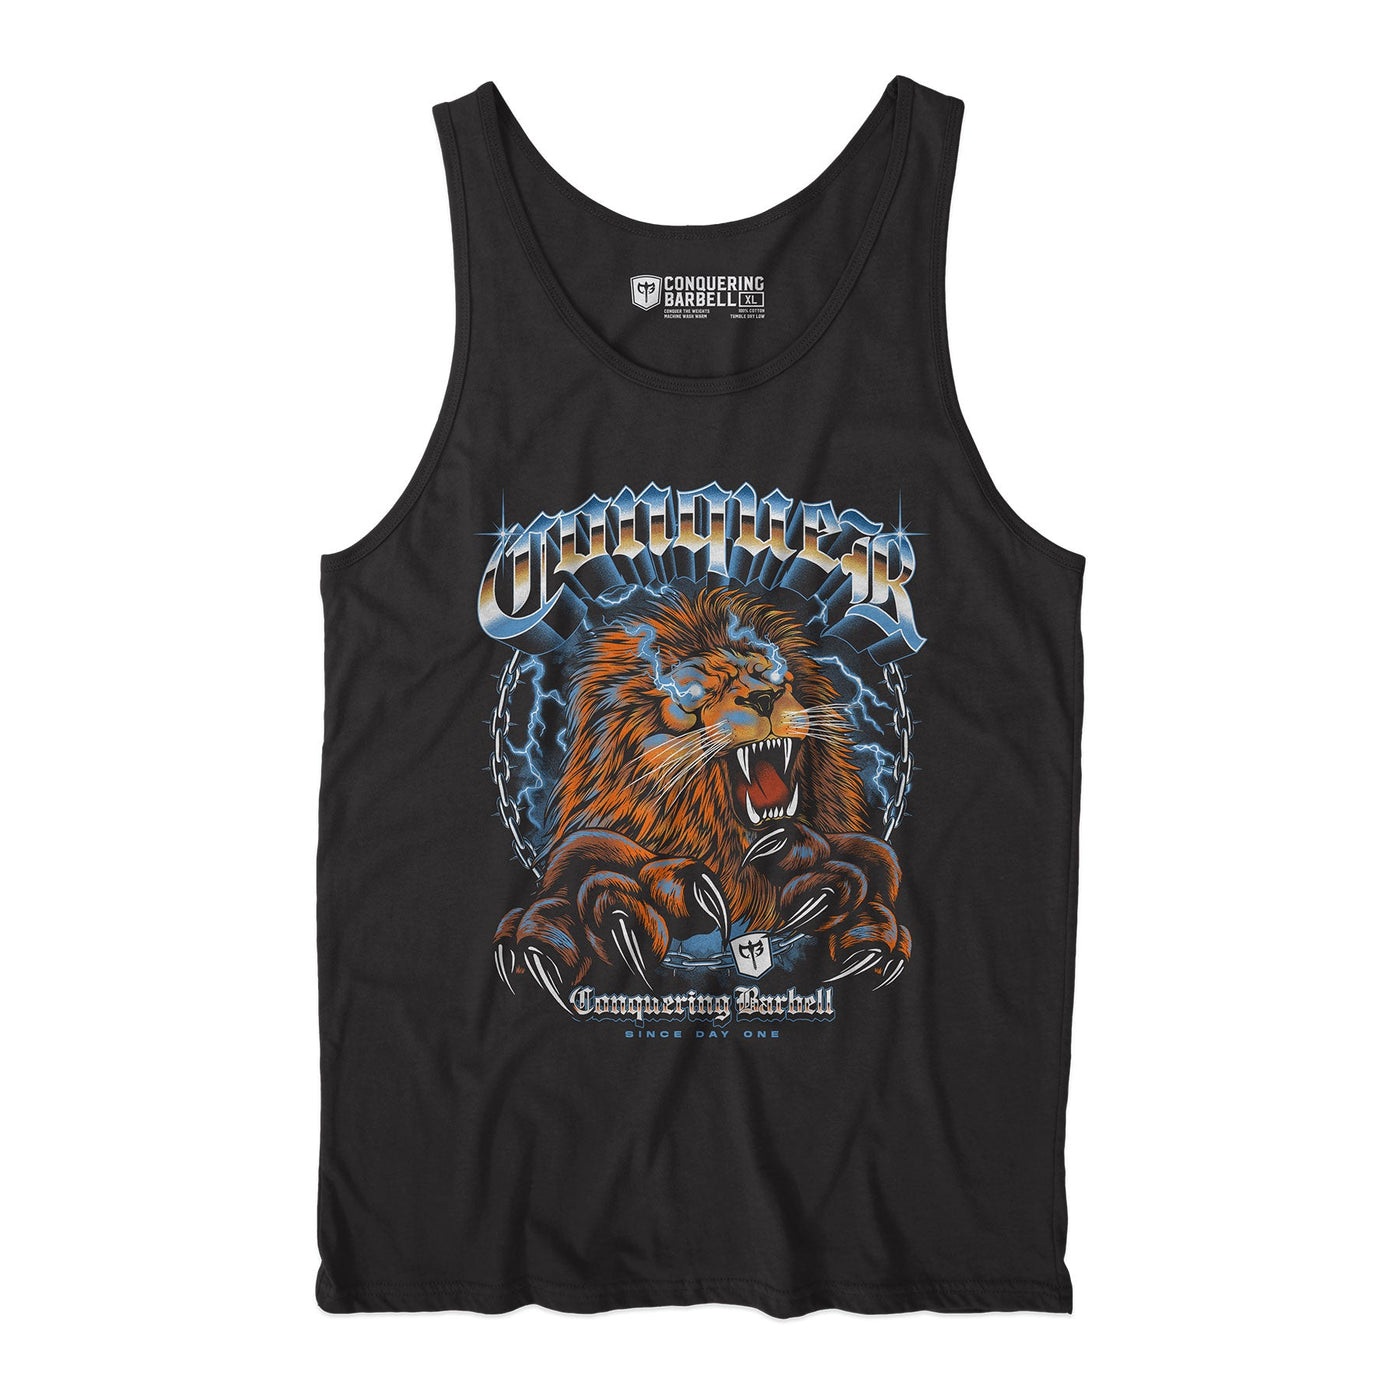 Conquering Lion - on Black tank top - Conquering Barbell